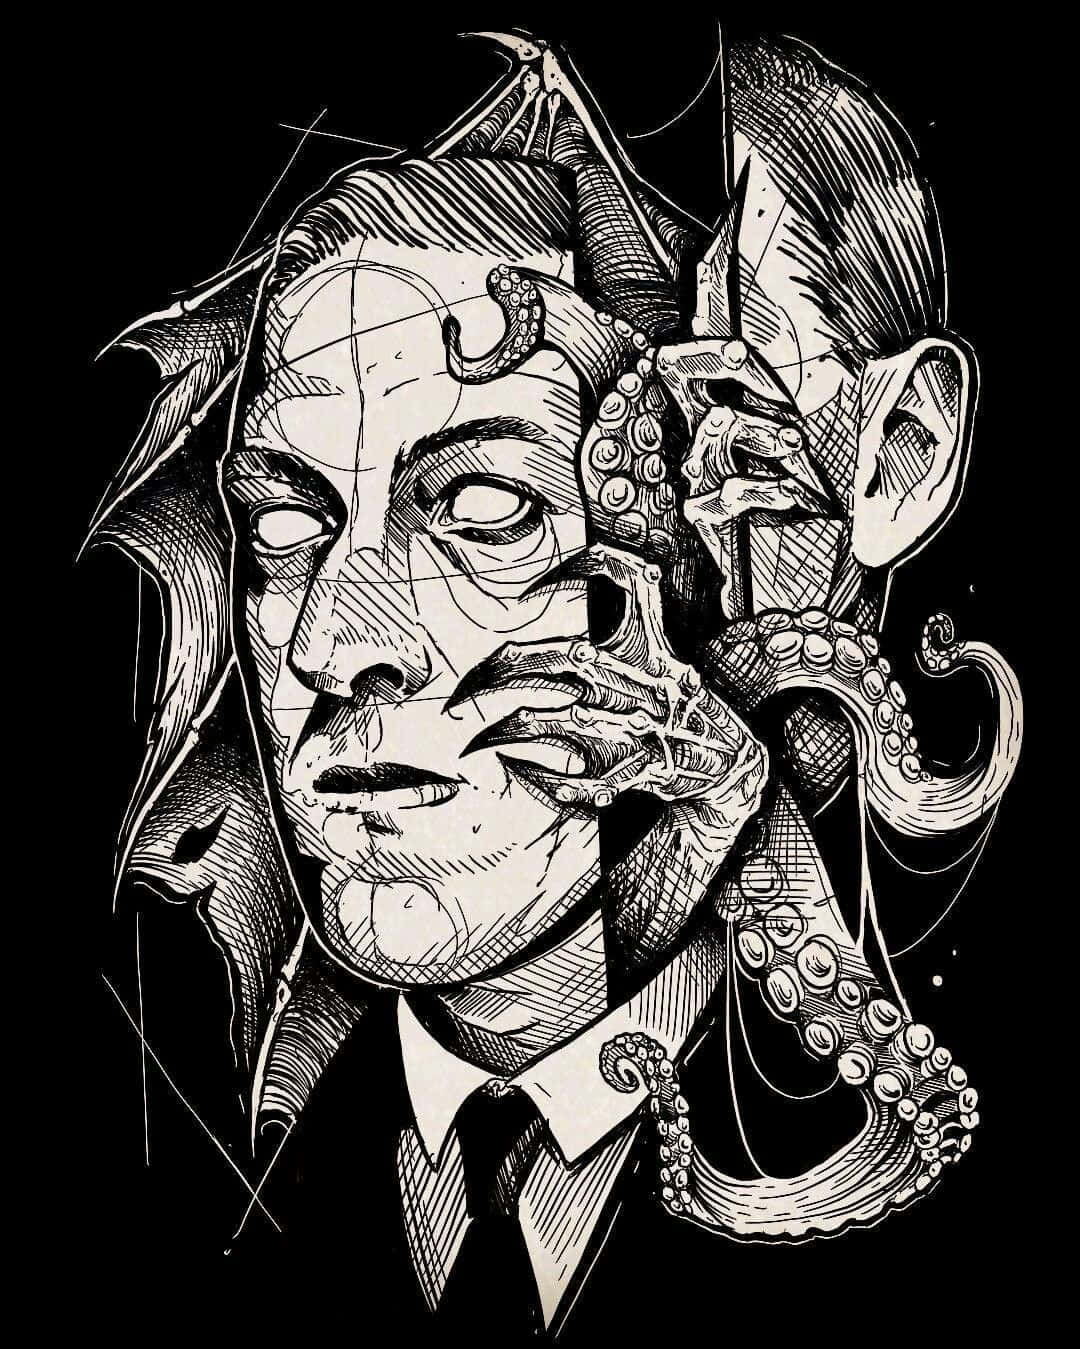 Enter the world of cosmic horror and explore the stories of H.P. Lovecraft